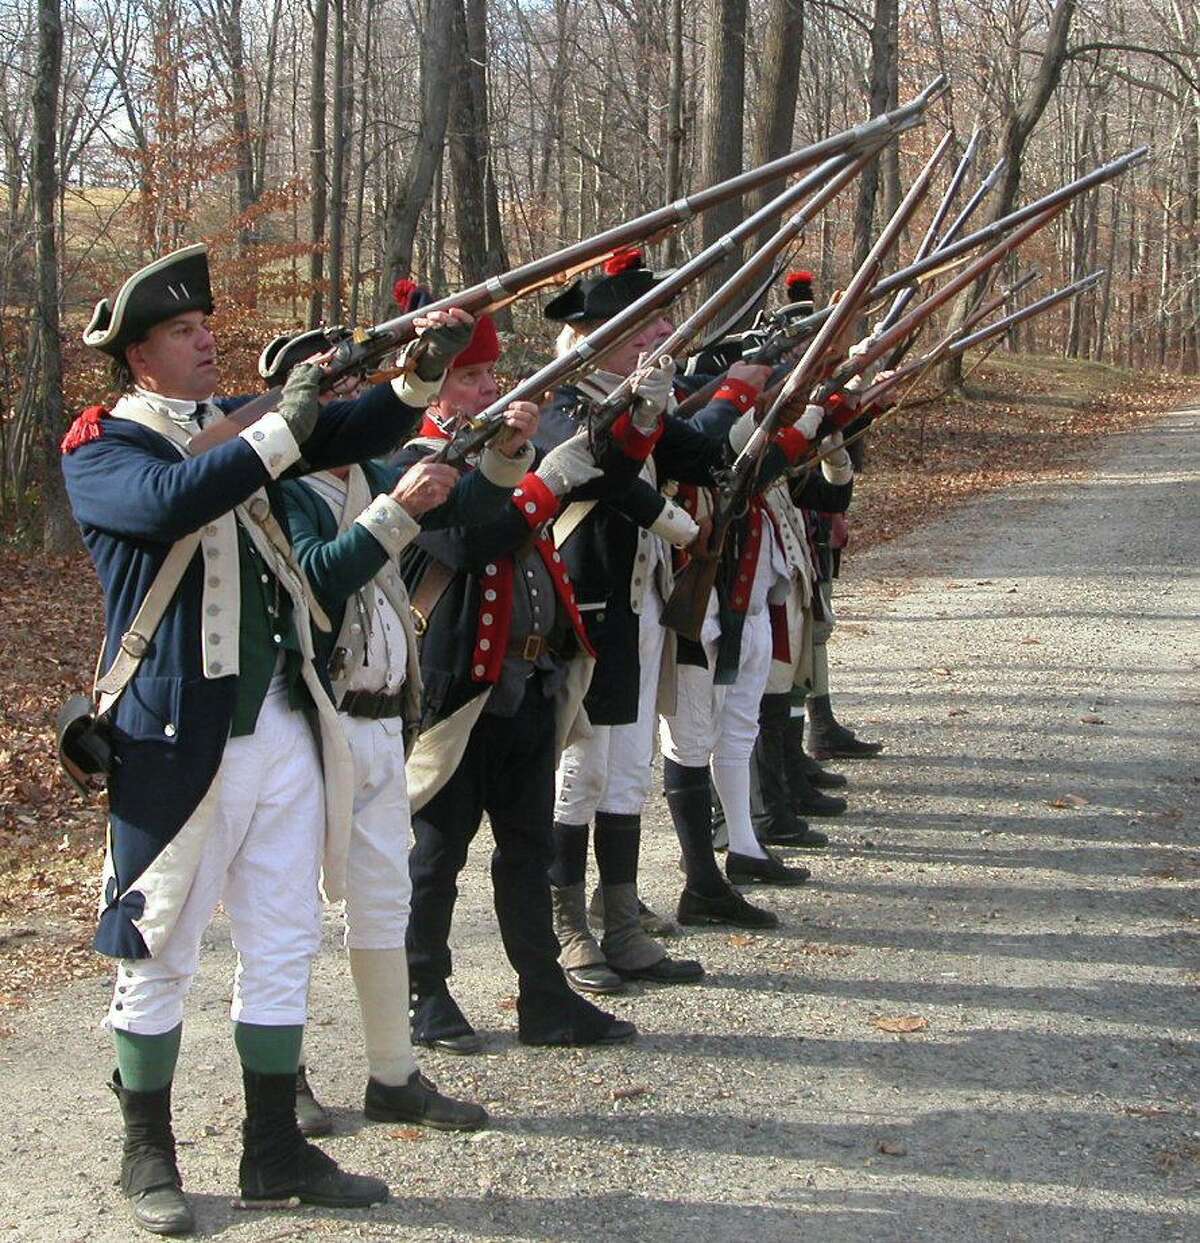 Reenactors from the 5th Connecticut Militia will lead attendees on a great historical and archaeological tour of Putnam Park at 11 a.m. Saturday.